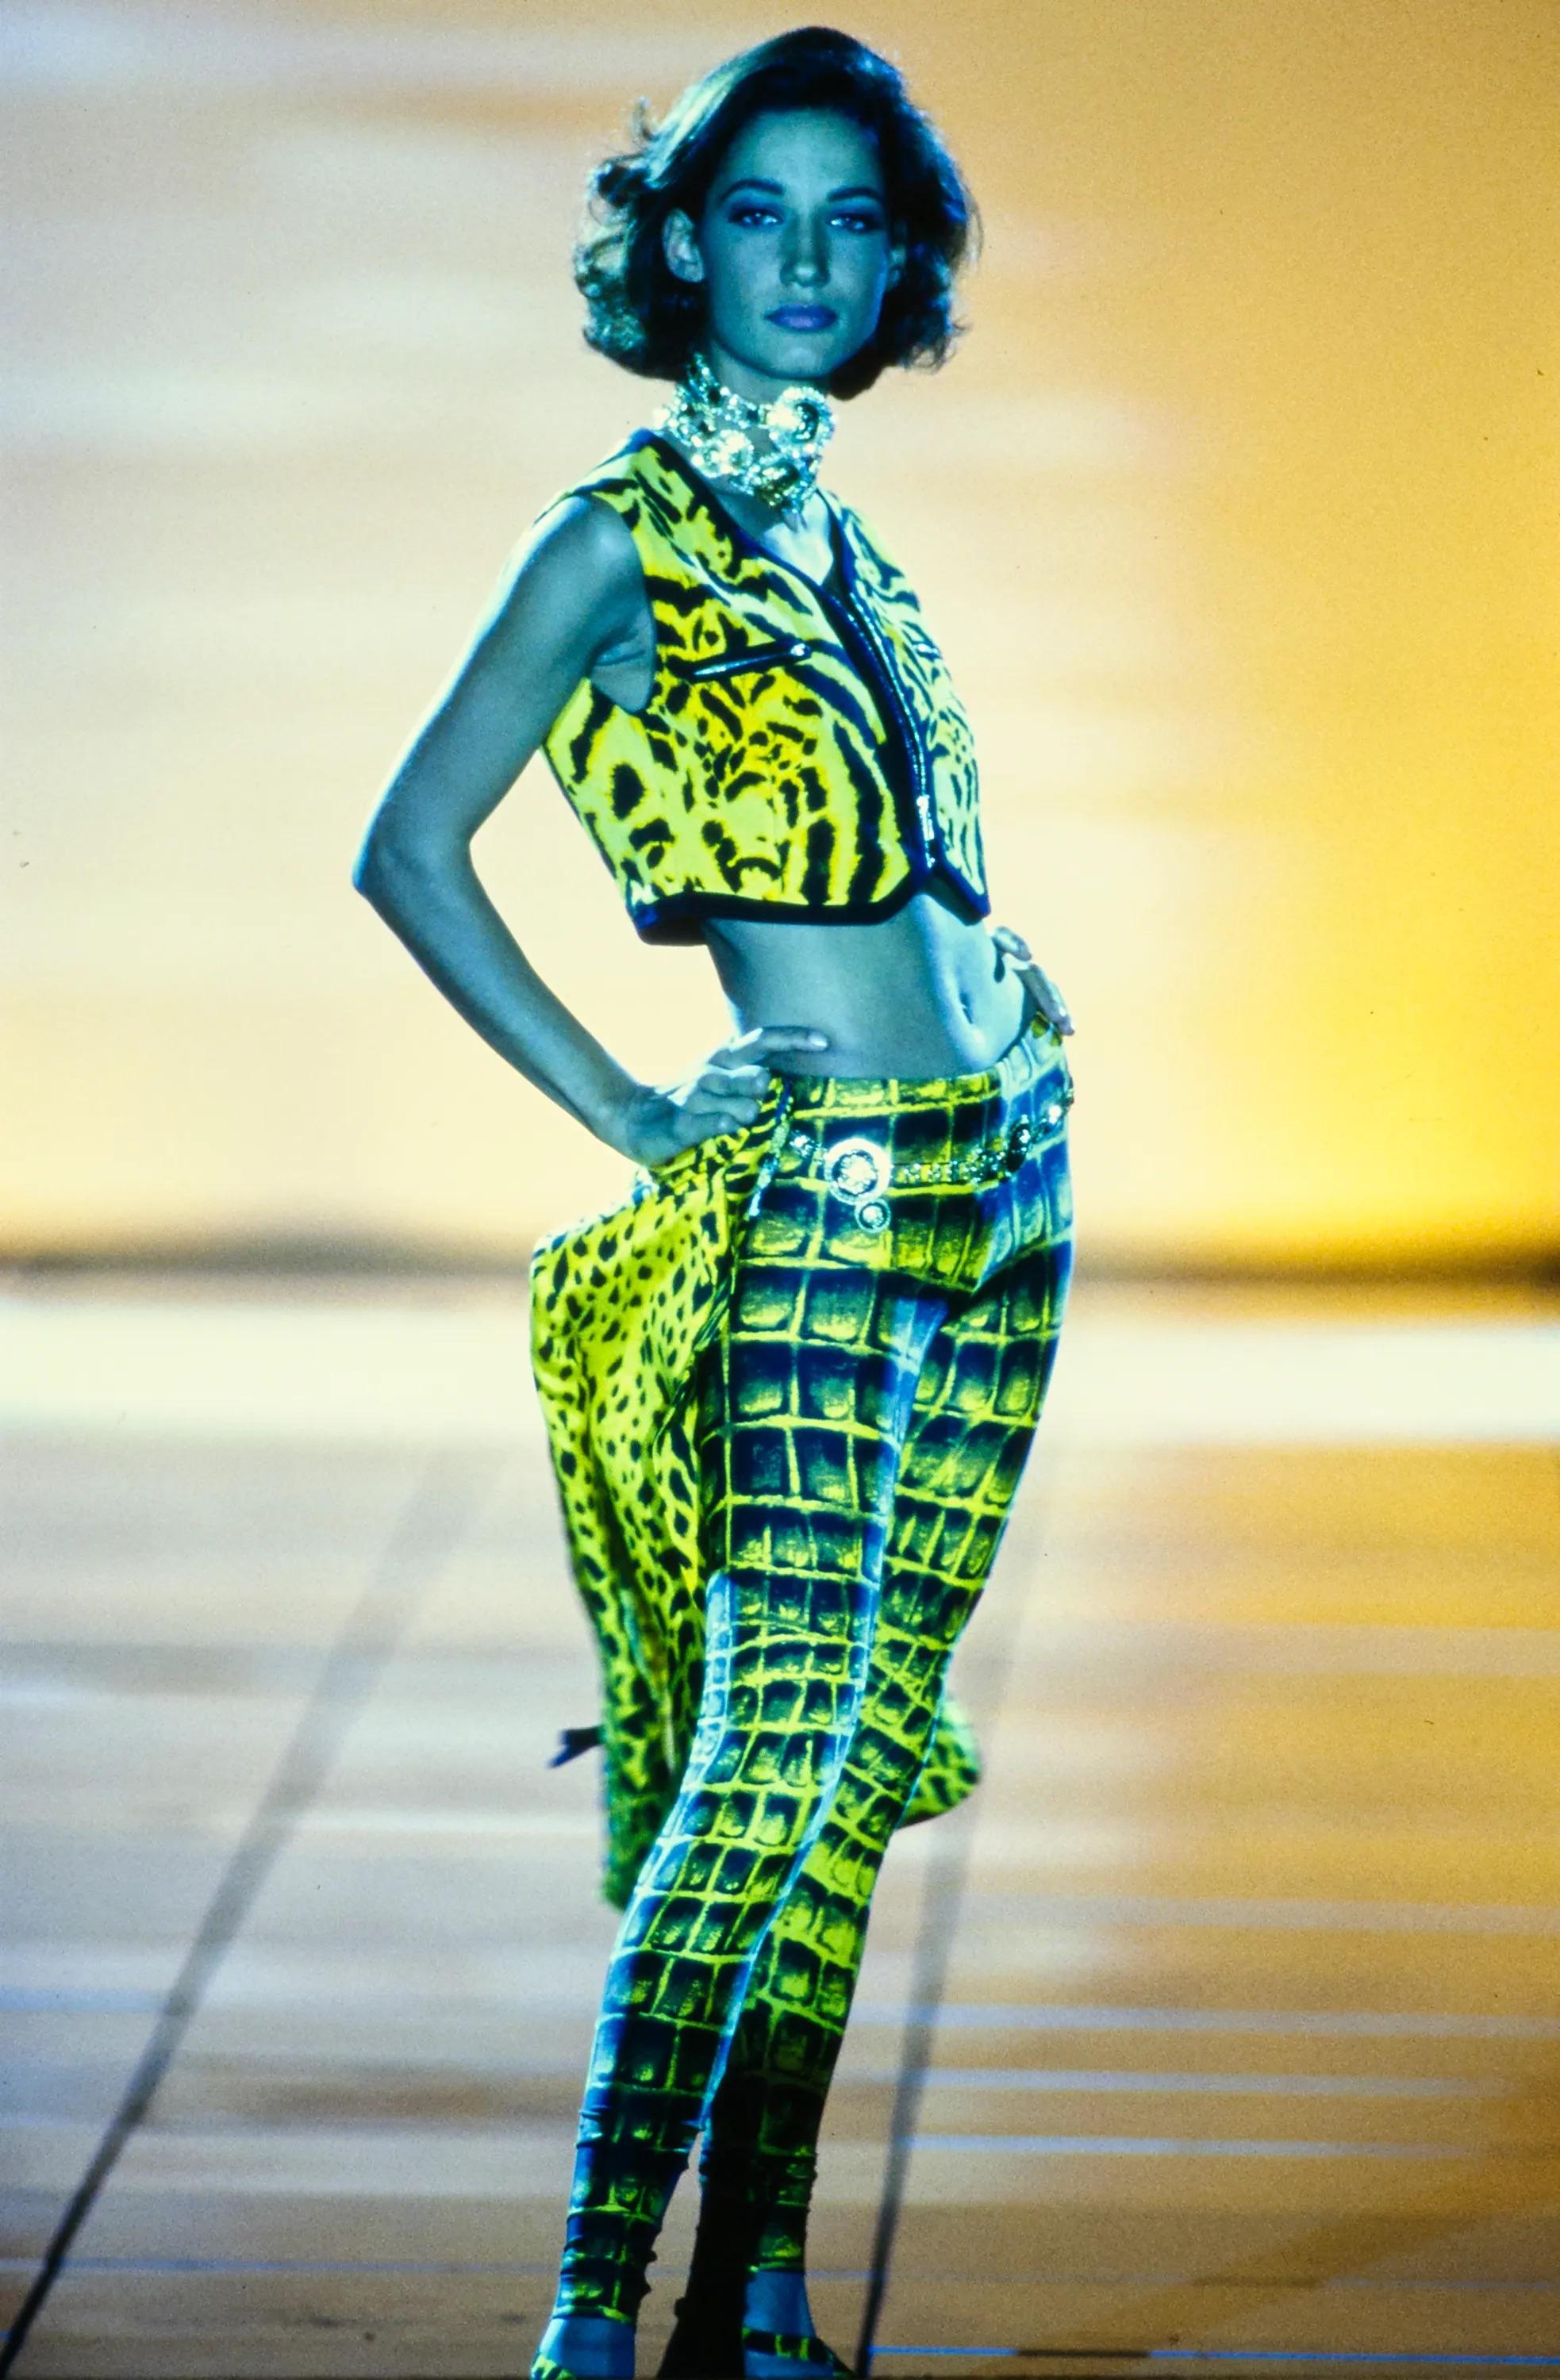 Presenting a pair of yellow crocodile print Gianni Versace tights, designed by Gianni Versace. From the Spring/Summer 1992 collection, these legging pants debuted on the season's runway as part of look 25, modeled by Marpessa Hennink. Also captured